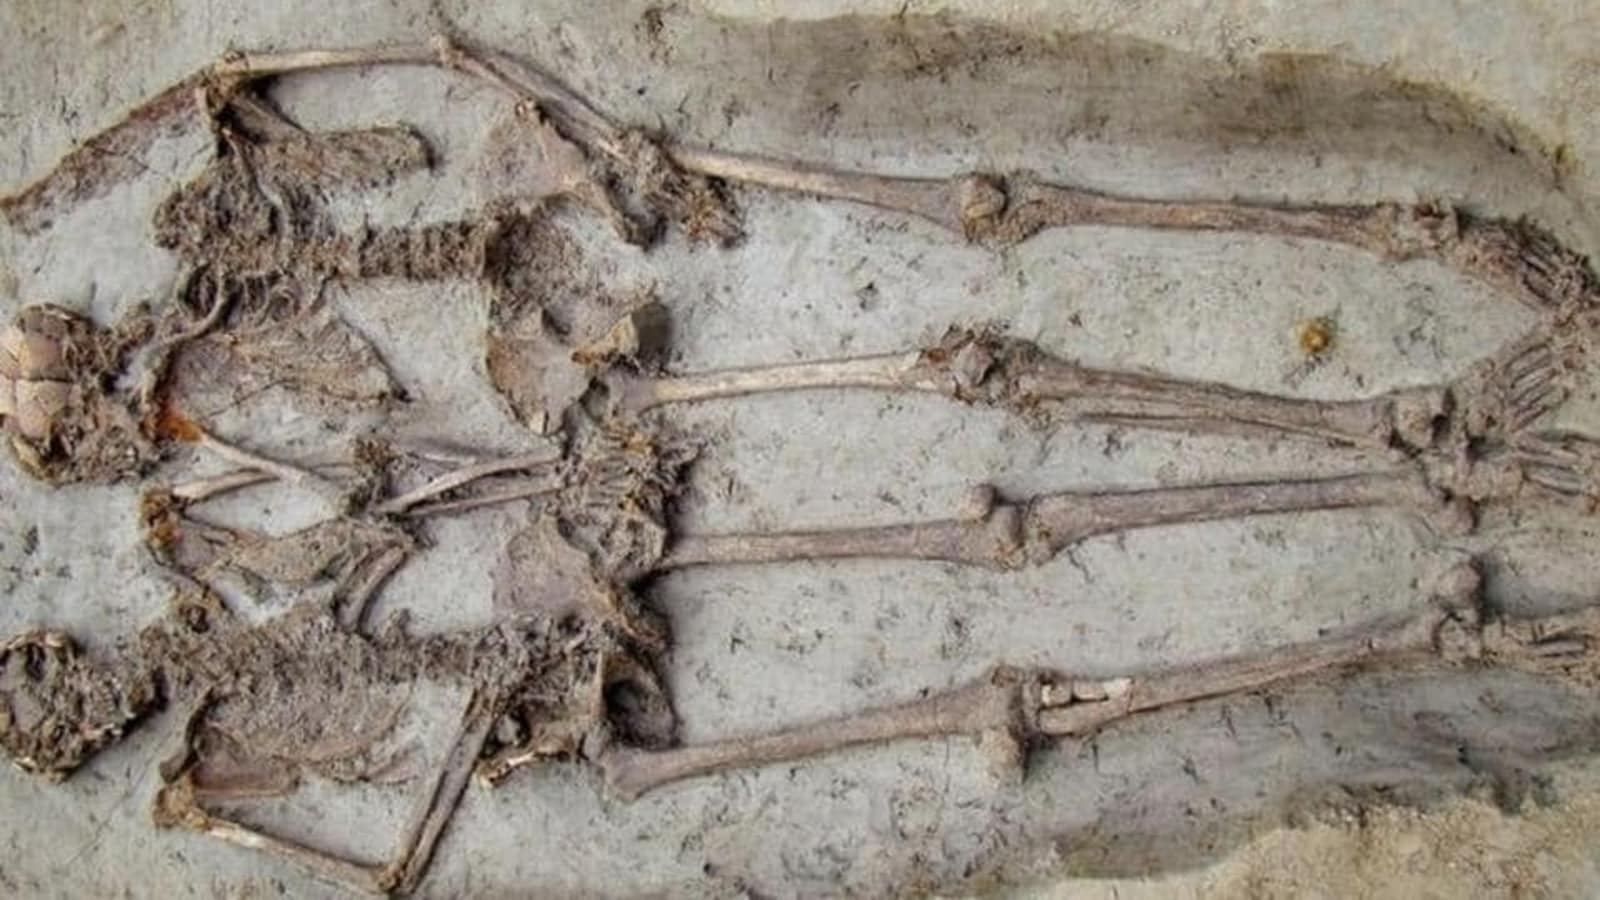 Skeletons found in Punjab those of Indian soldiers killed in 1857 revolt: Study